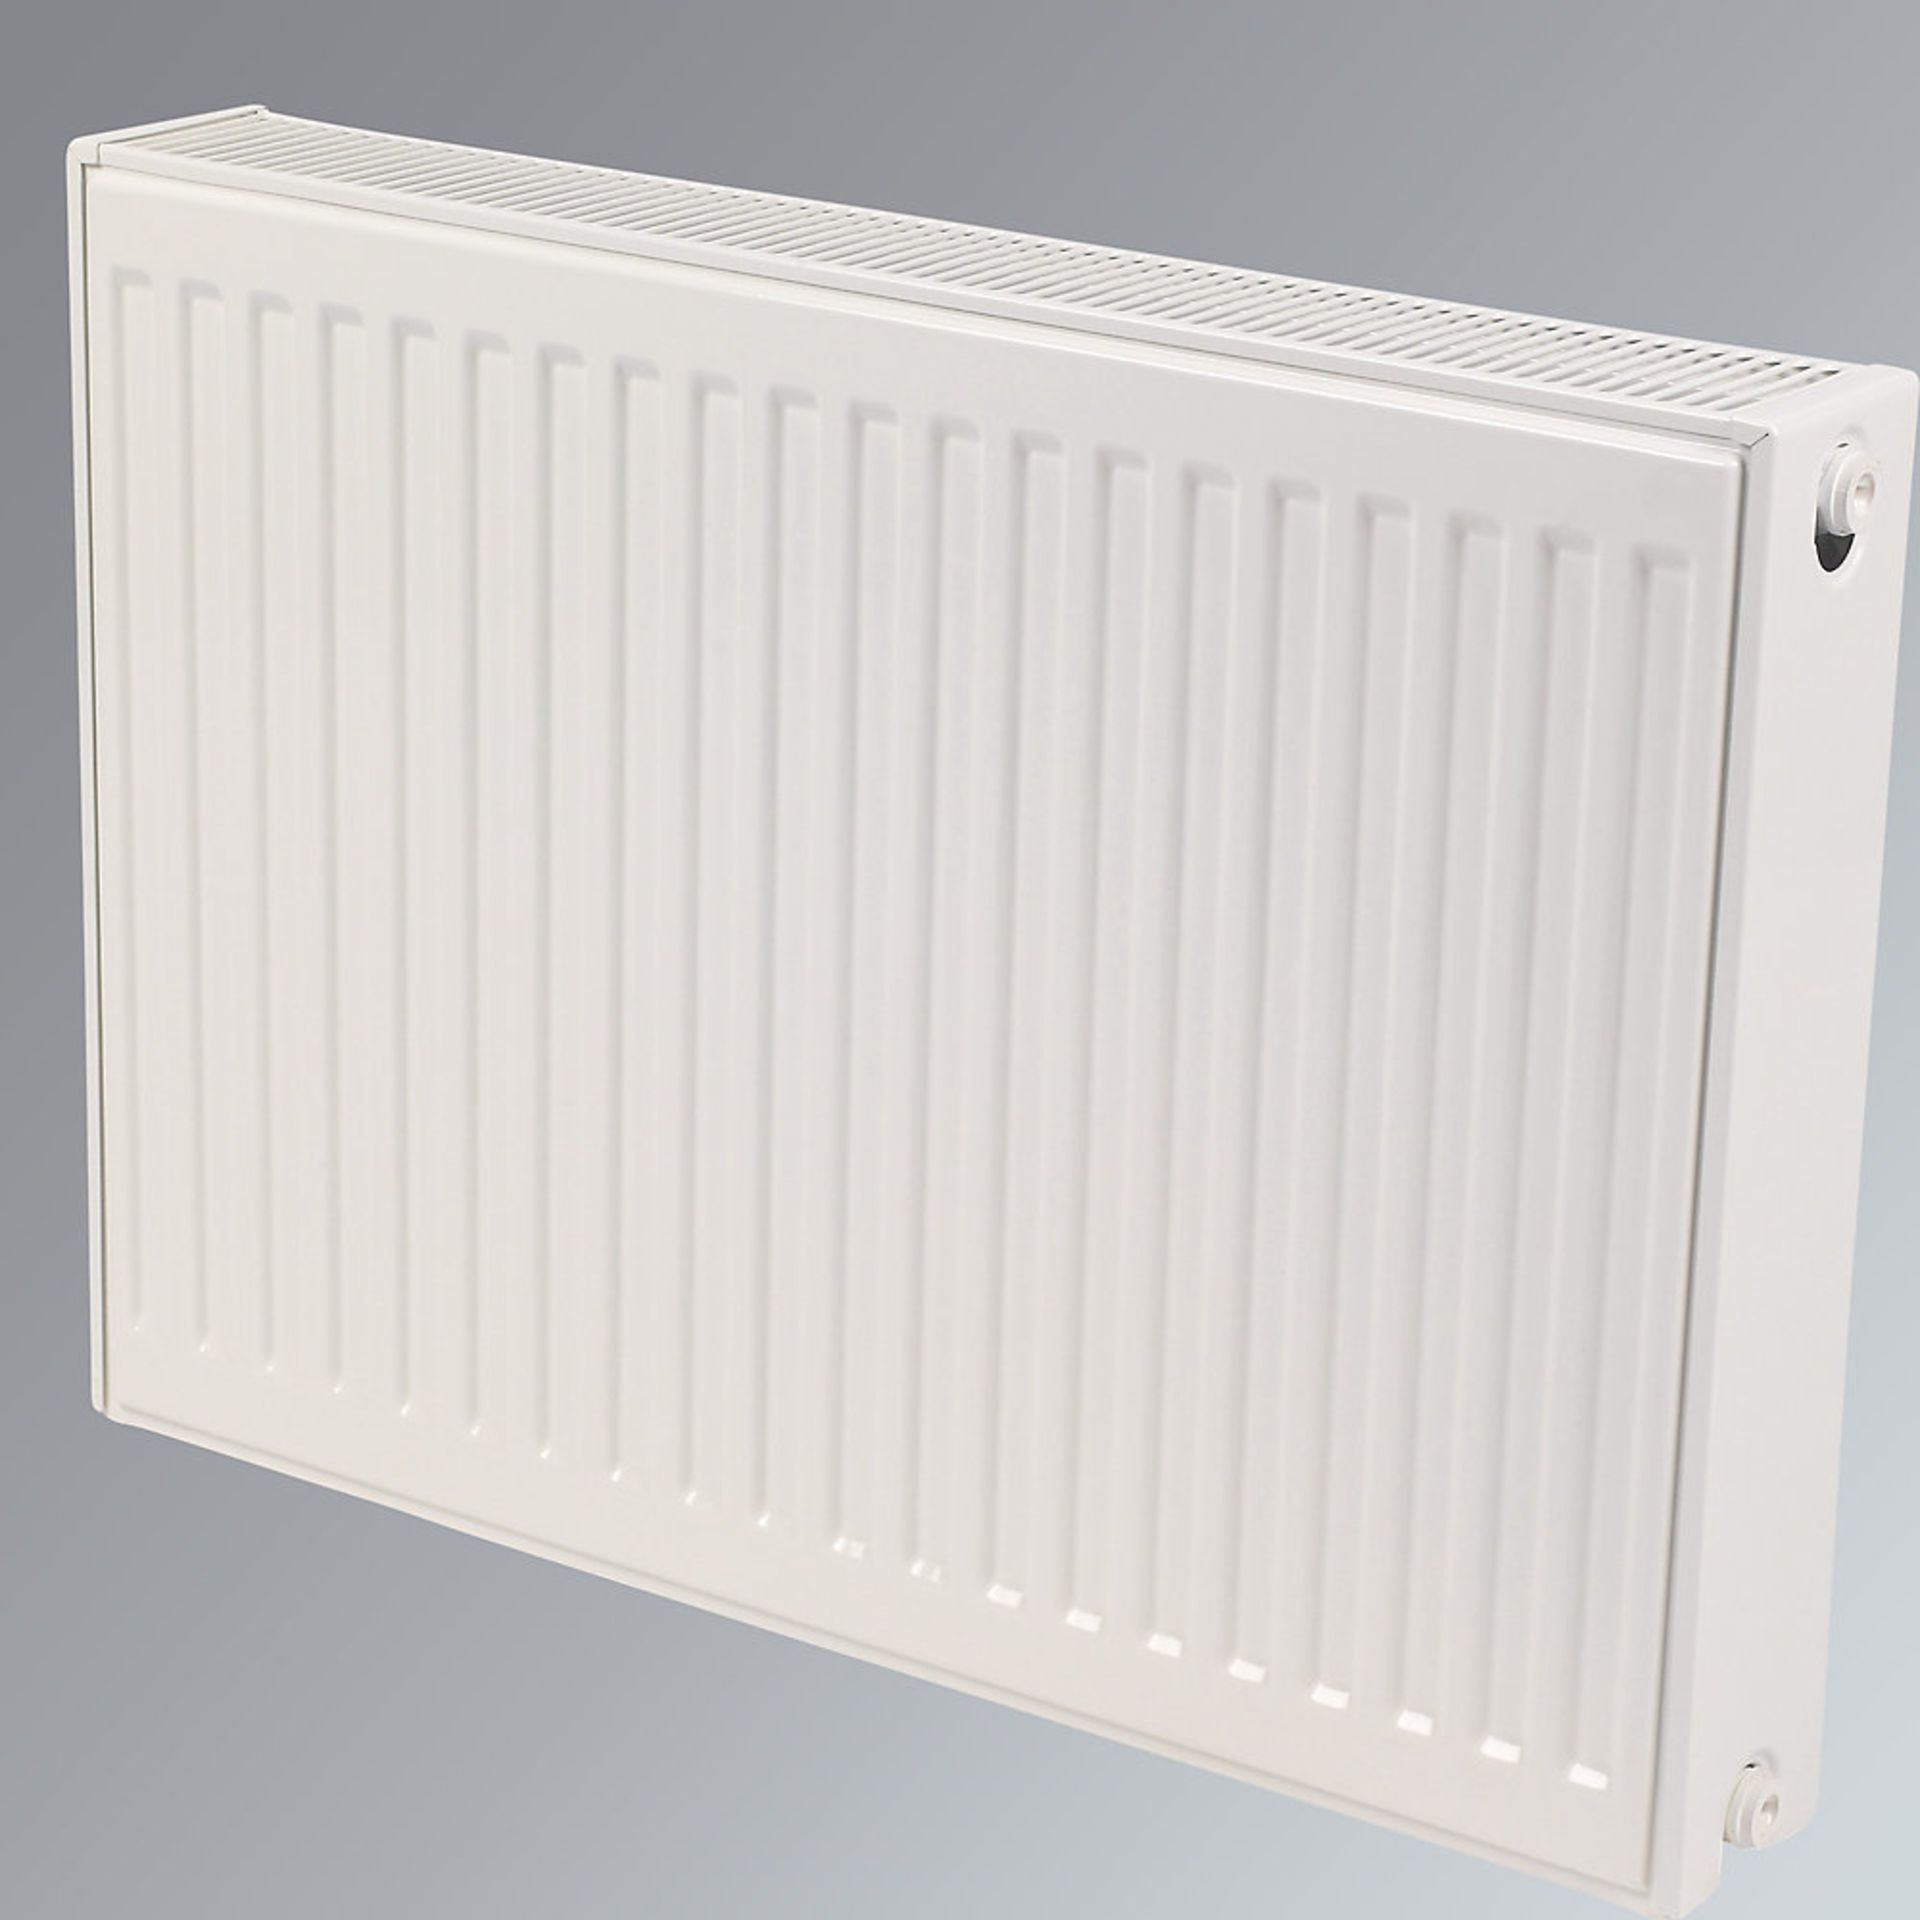 (RK1004) 600 X 700MM TYPE 22 DOUBLE-PANEL DOUBLE CONVECTOR RADIATOR WHITE. White convector ra...